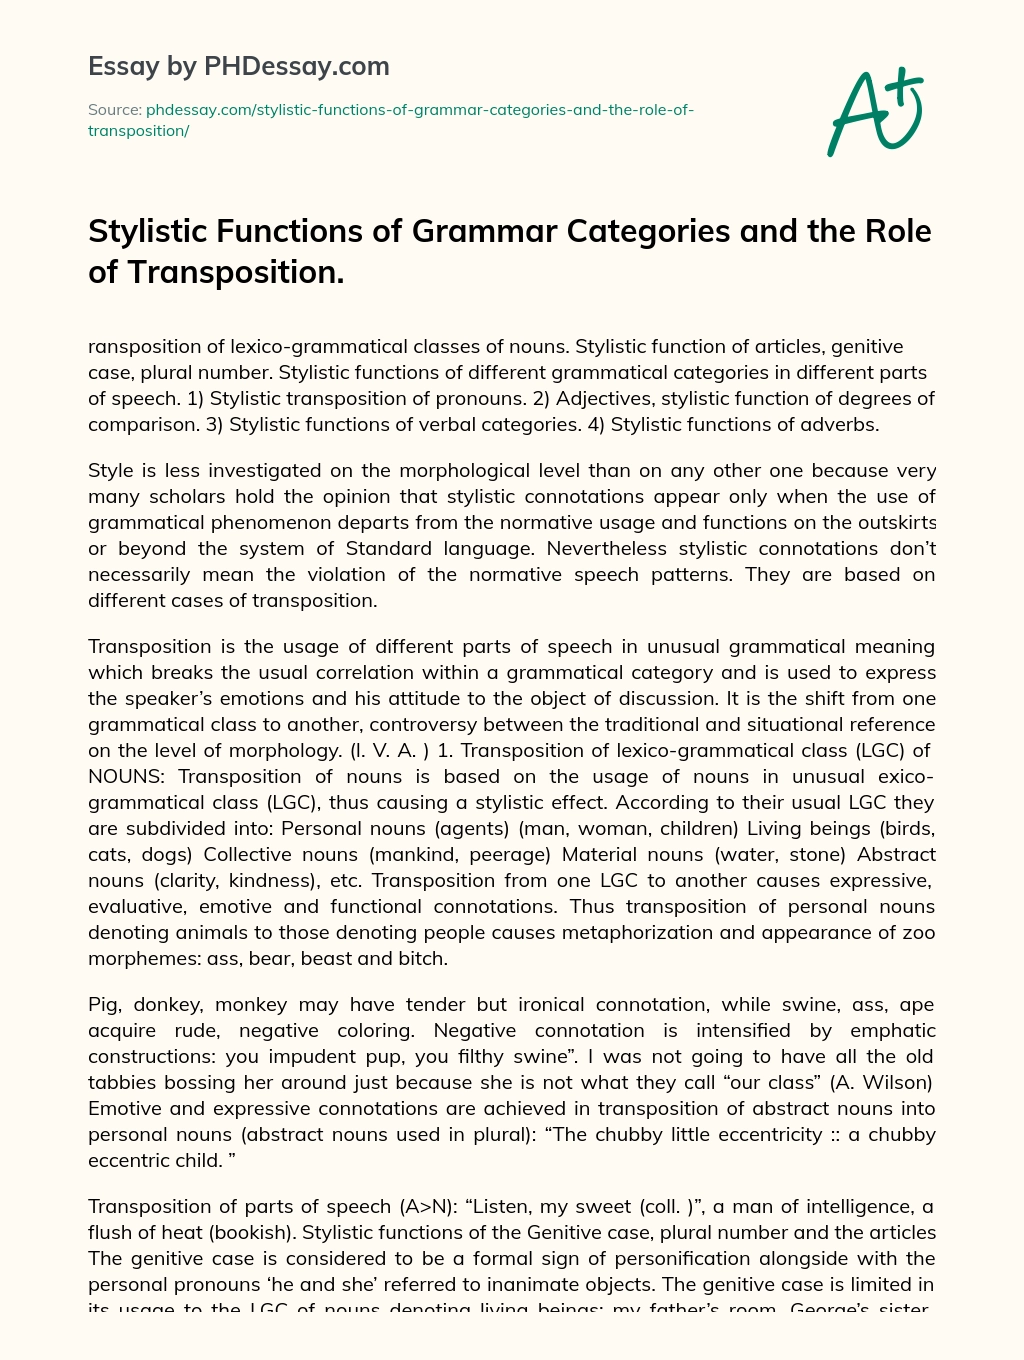 Stylistic Functions of Grammar Categories and the Role of Transposition essay